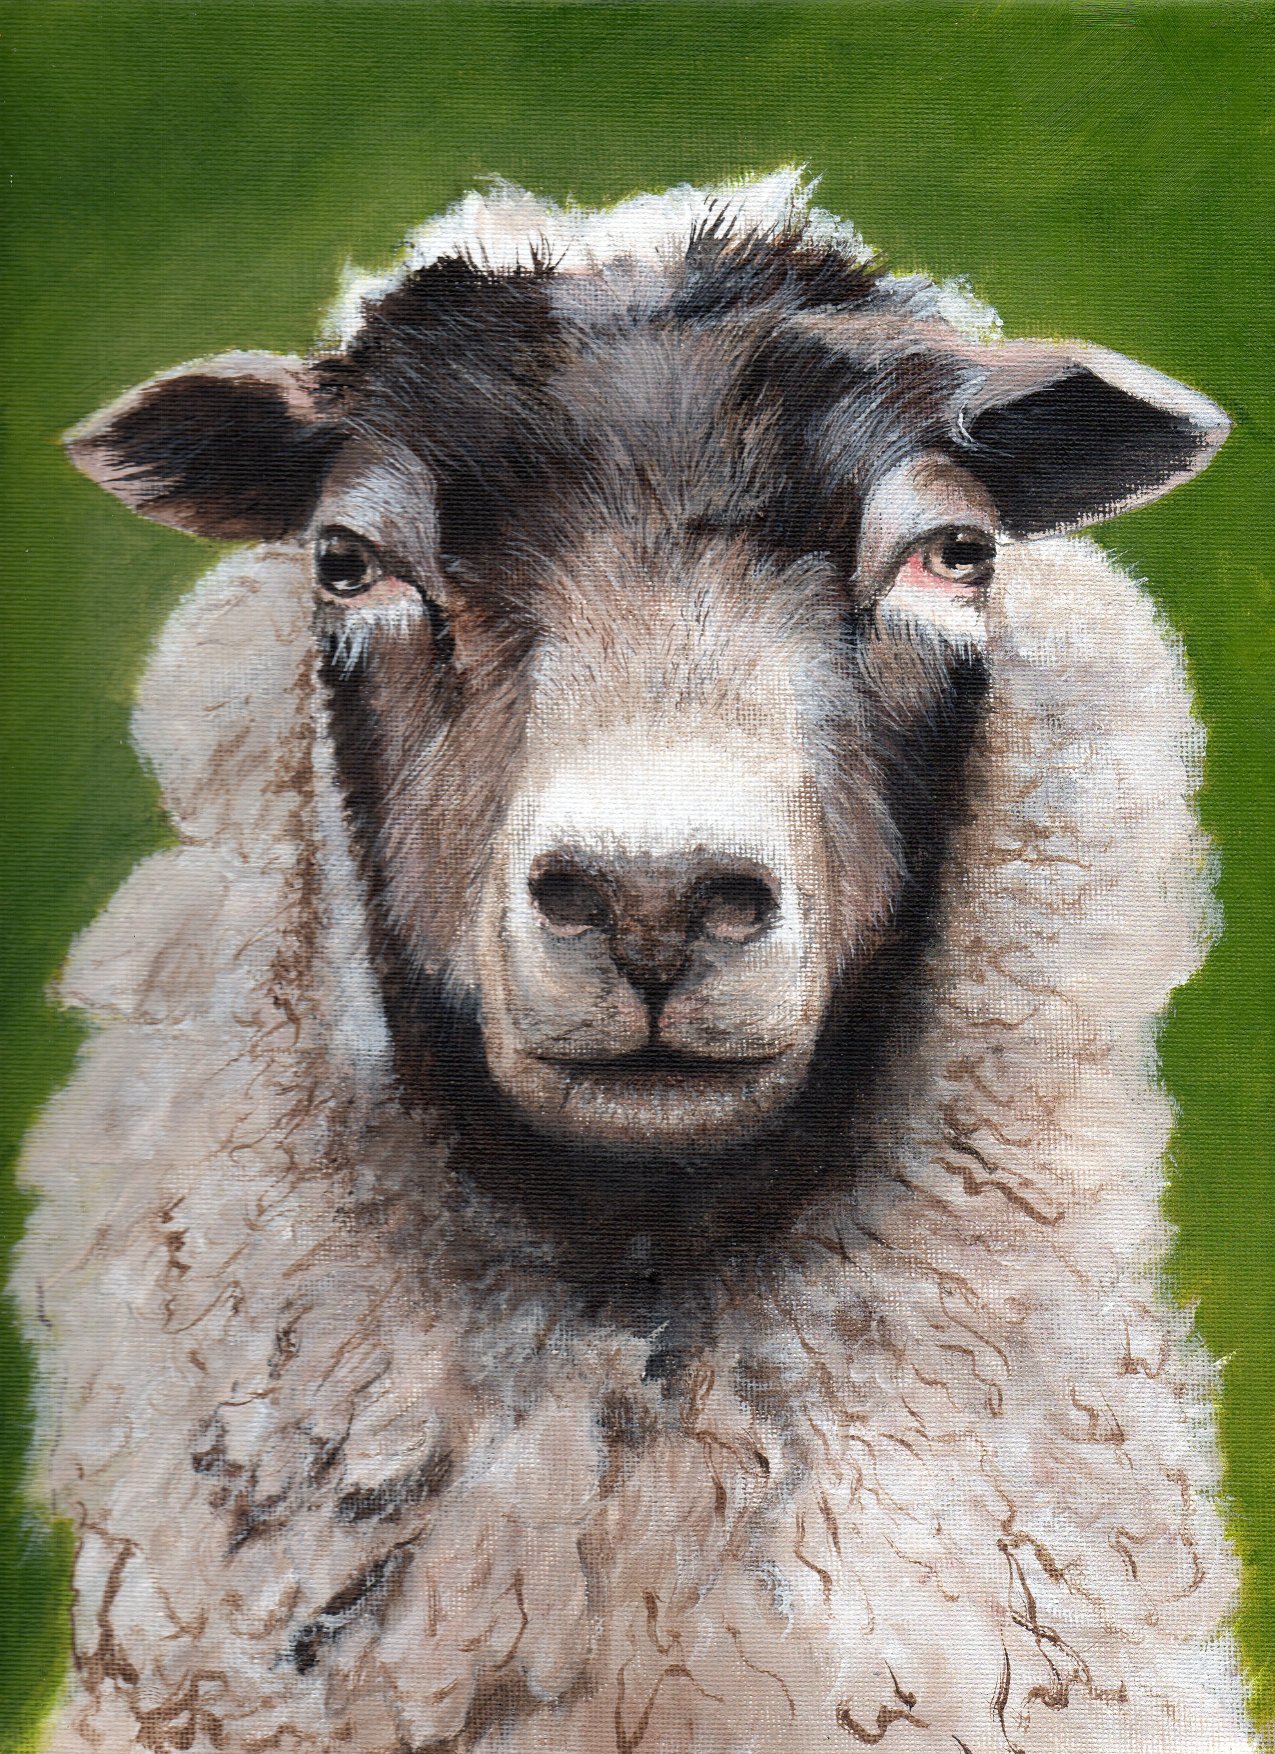 Sheep Painting | The Journal of a Struggling Artist